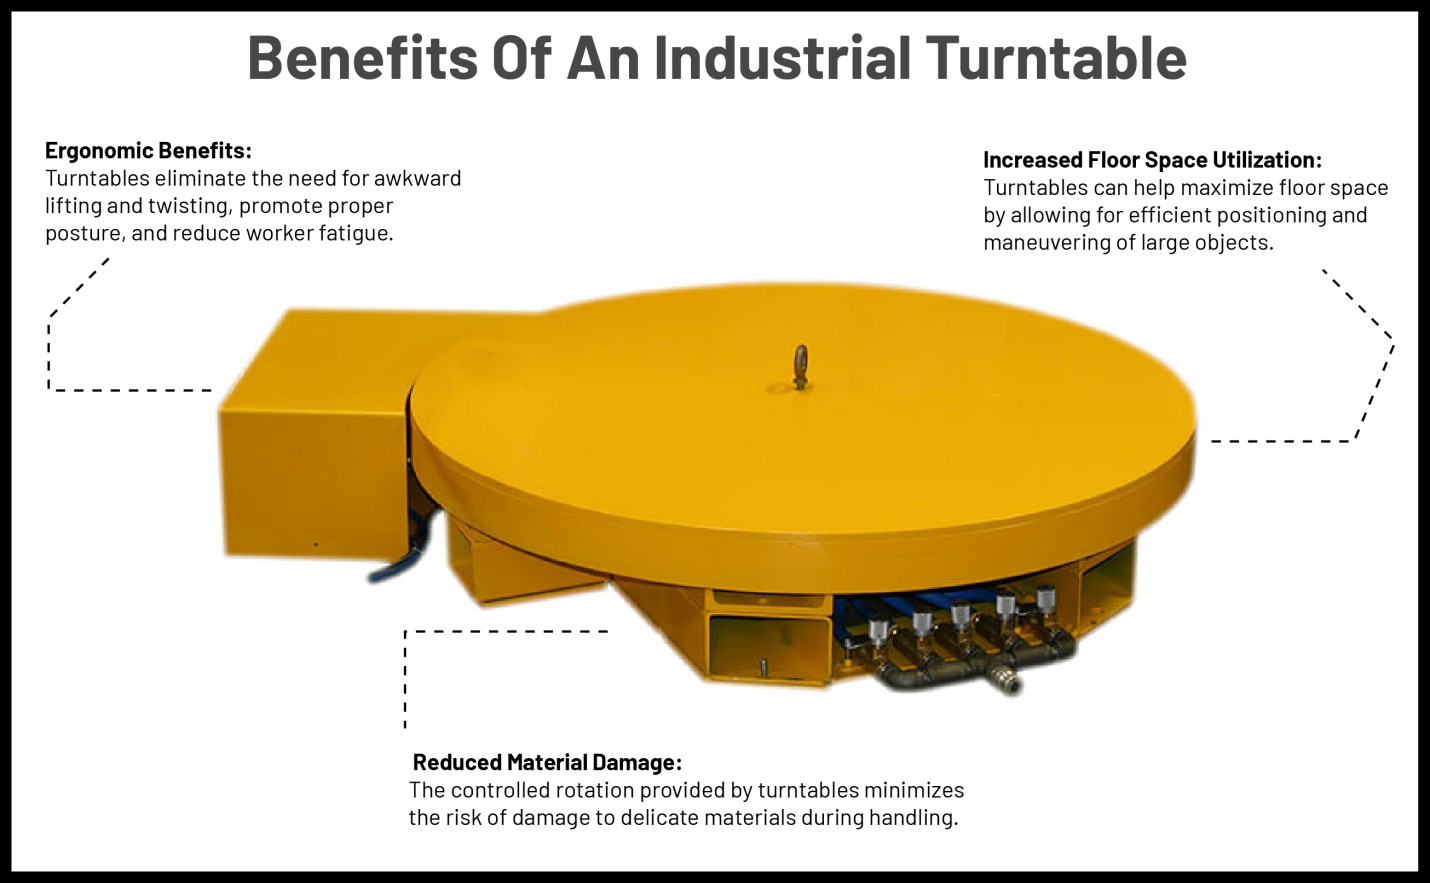 An infographic showing the benefits of an industrial turntable